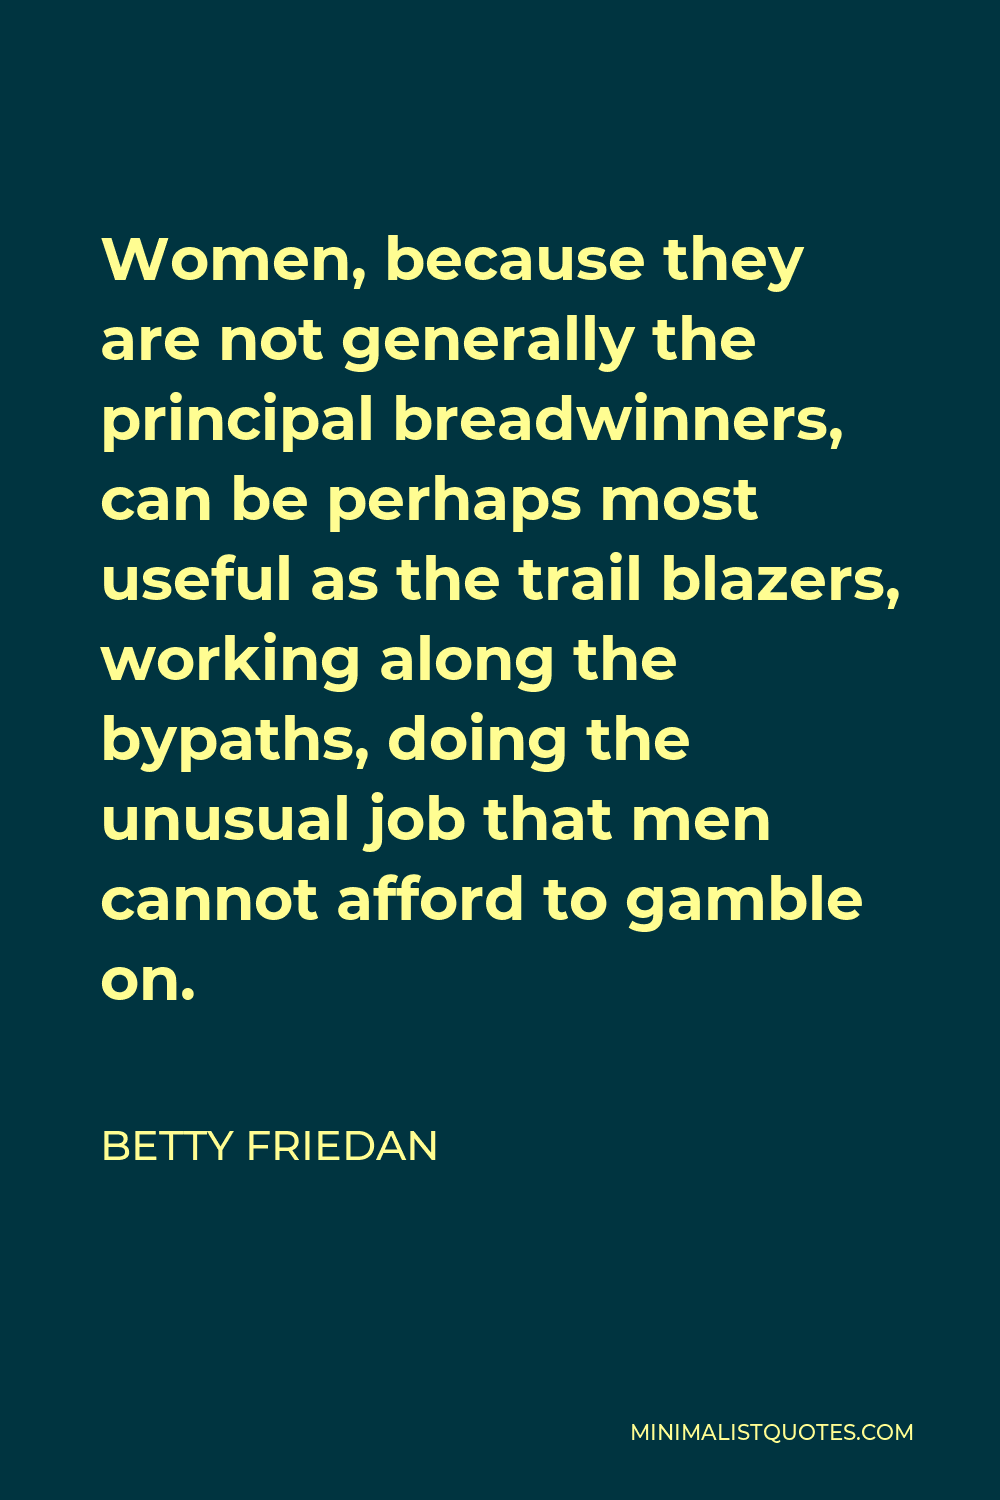 Betty Friedan Quote - Women, because they are not generally the principal breadwinners, can be perhaps most useful as the trail blazers, working along the bypaths, doing the unusual job that men cannot afford to gamble on.